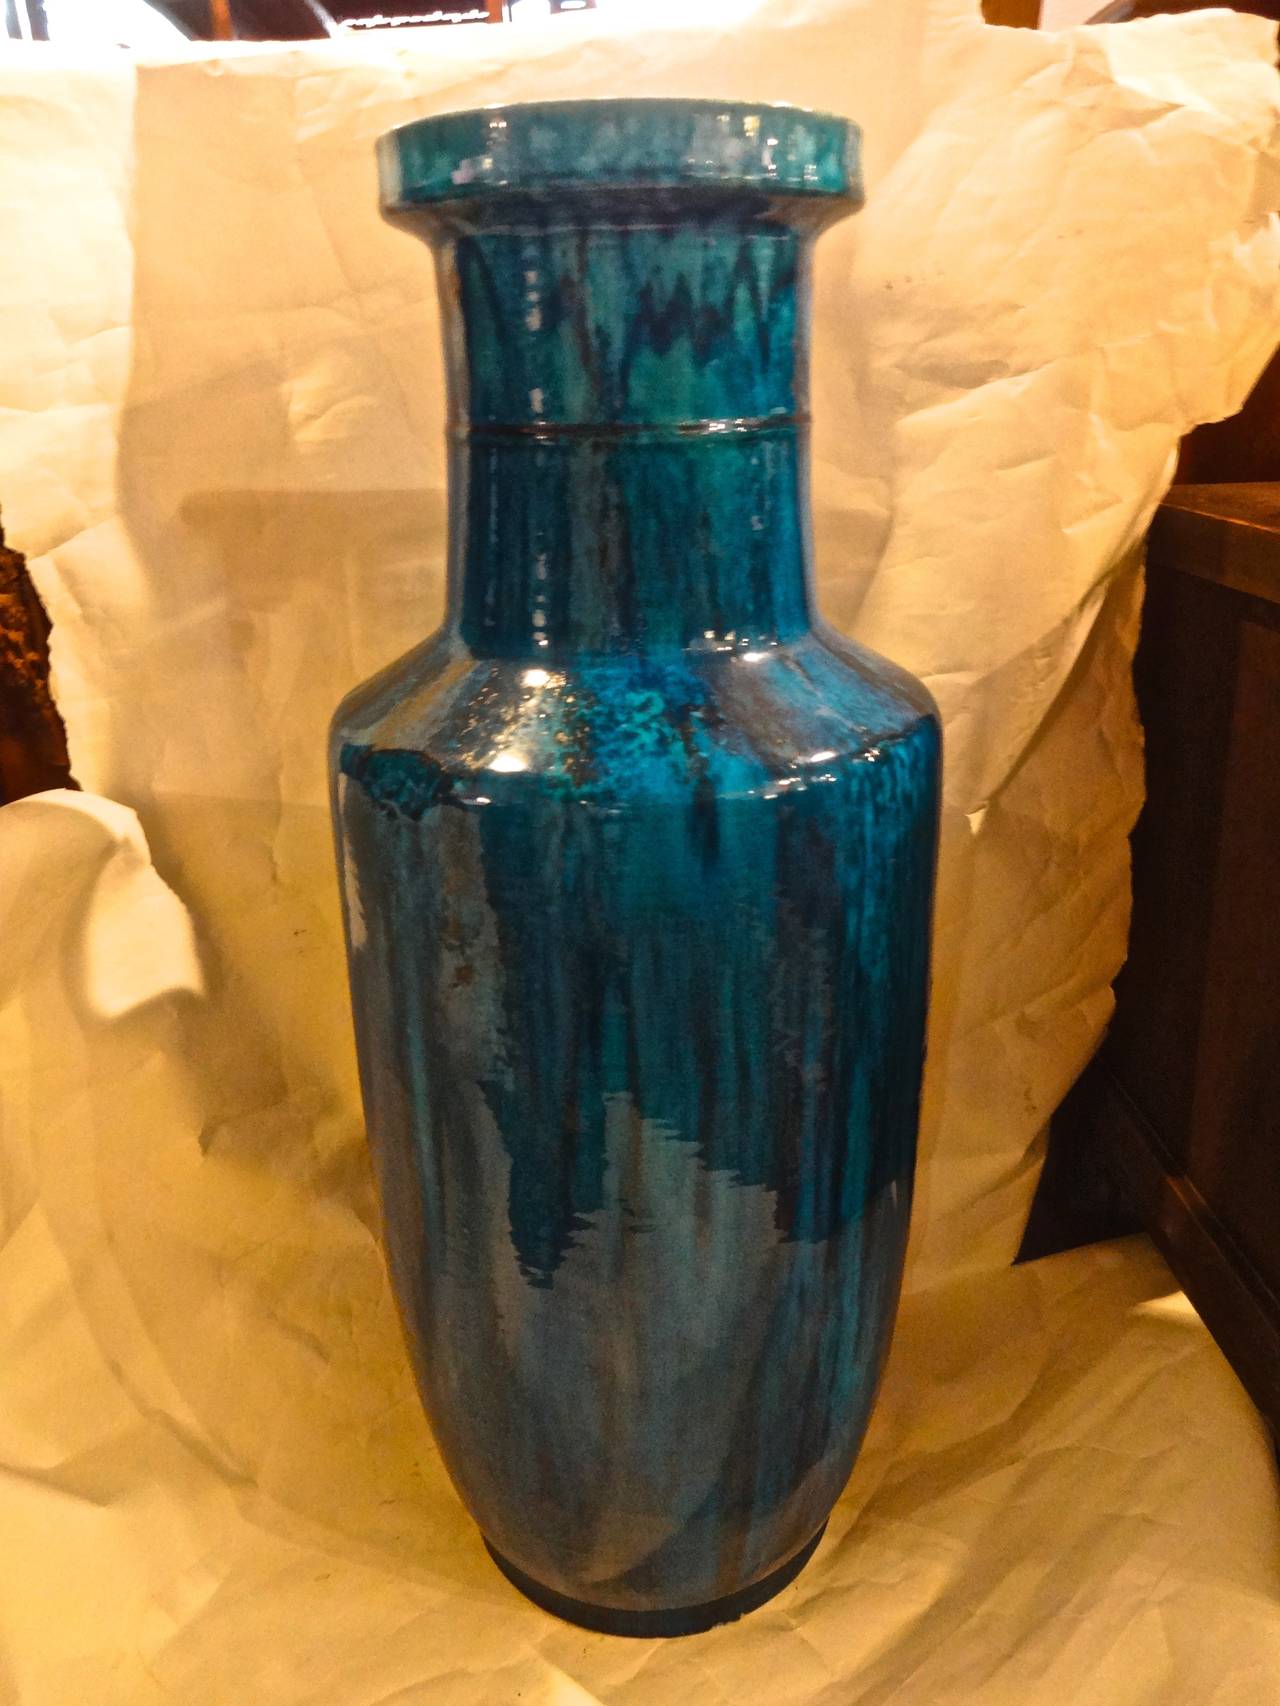 The RARE Chinese ROULEAU VASE is large and well shaped. Rare in the turquiose crackled glaze finish This had been in a collection (to be named after purchase) of a 40 year collection of fine decorative arts acquired all over the world. Ch'ing